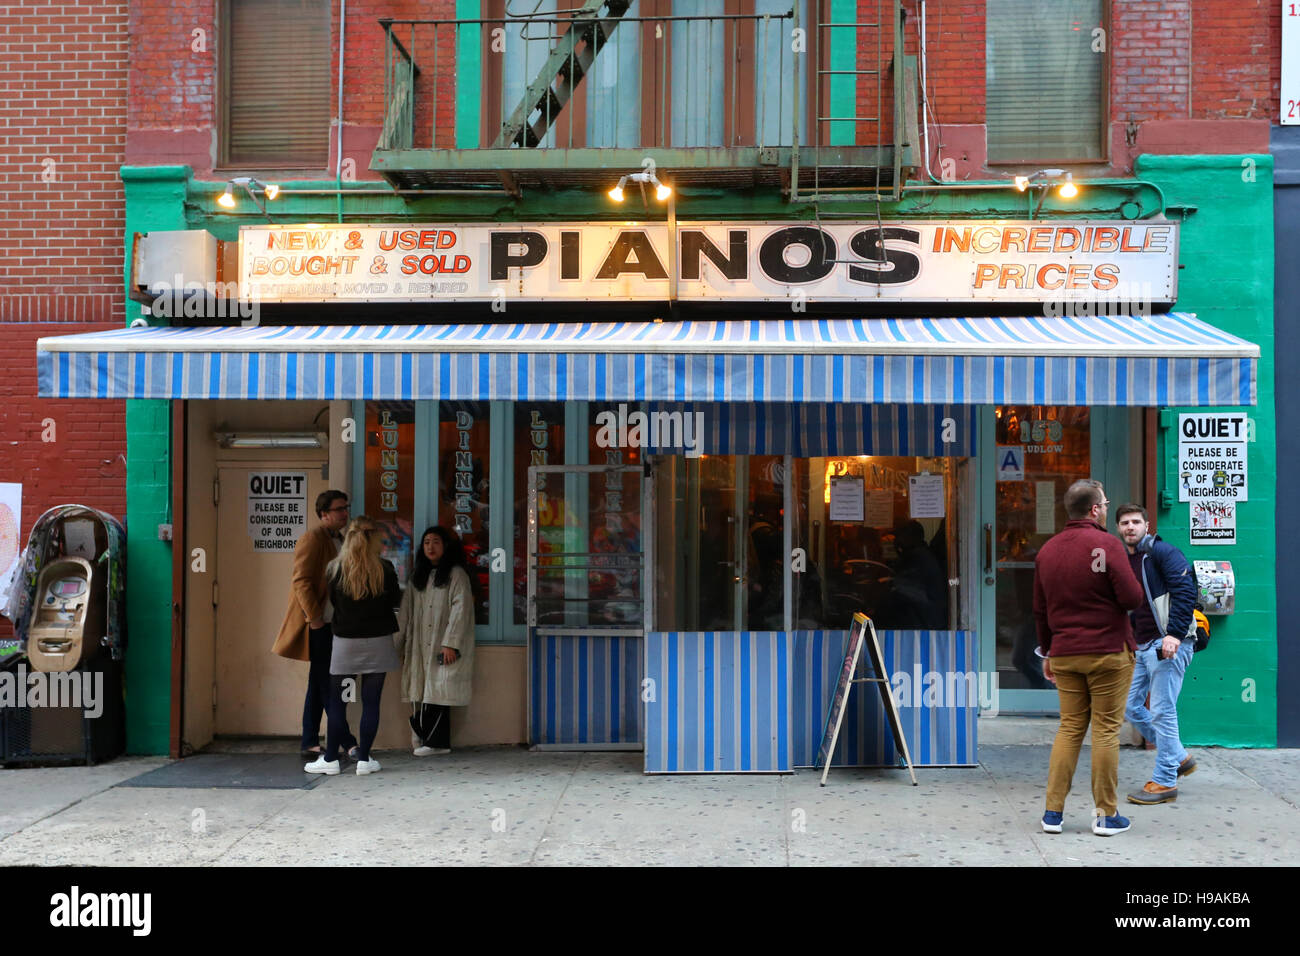 Pianos NYC, 158 Ludlow St, New York, NY. exterior storefront of a music venue in the Lower East Side neighborhood of Manhattan. Stock Photo